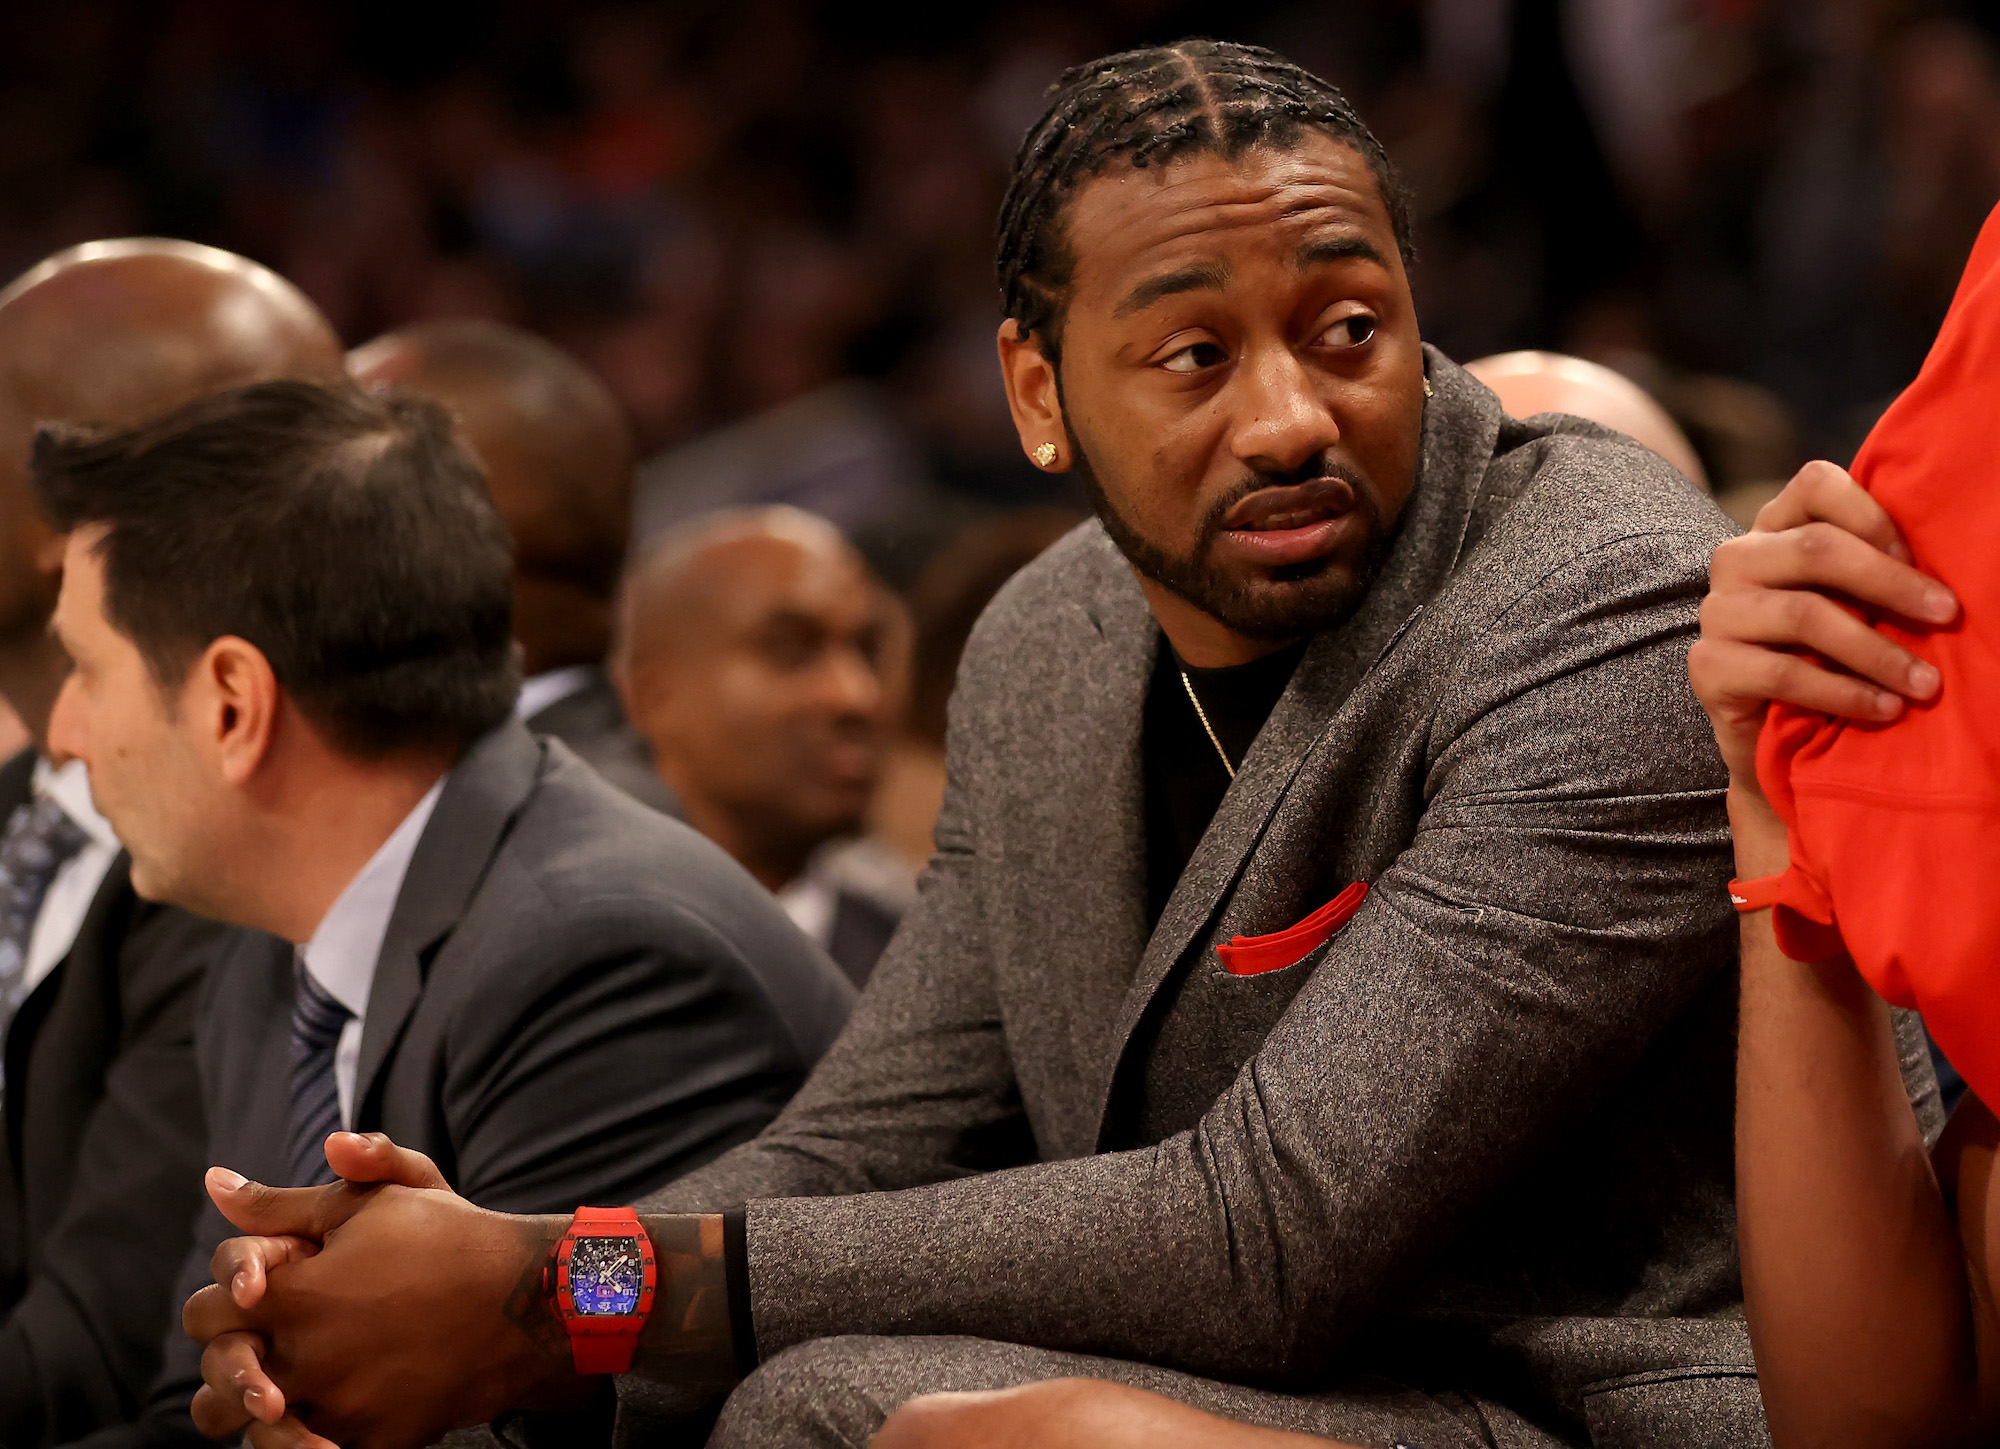 John Wall Wants The Wizards To Trade Him, Just As I Want The ESO's